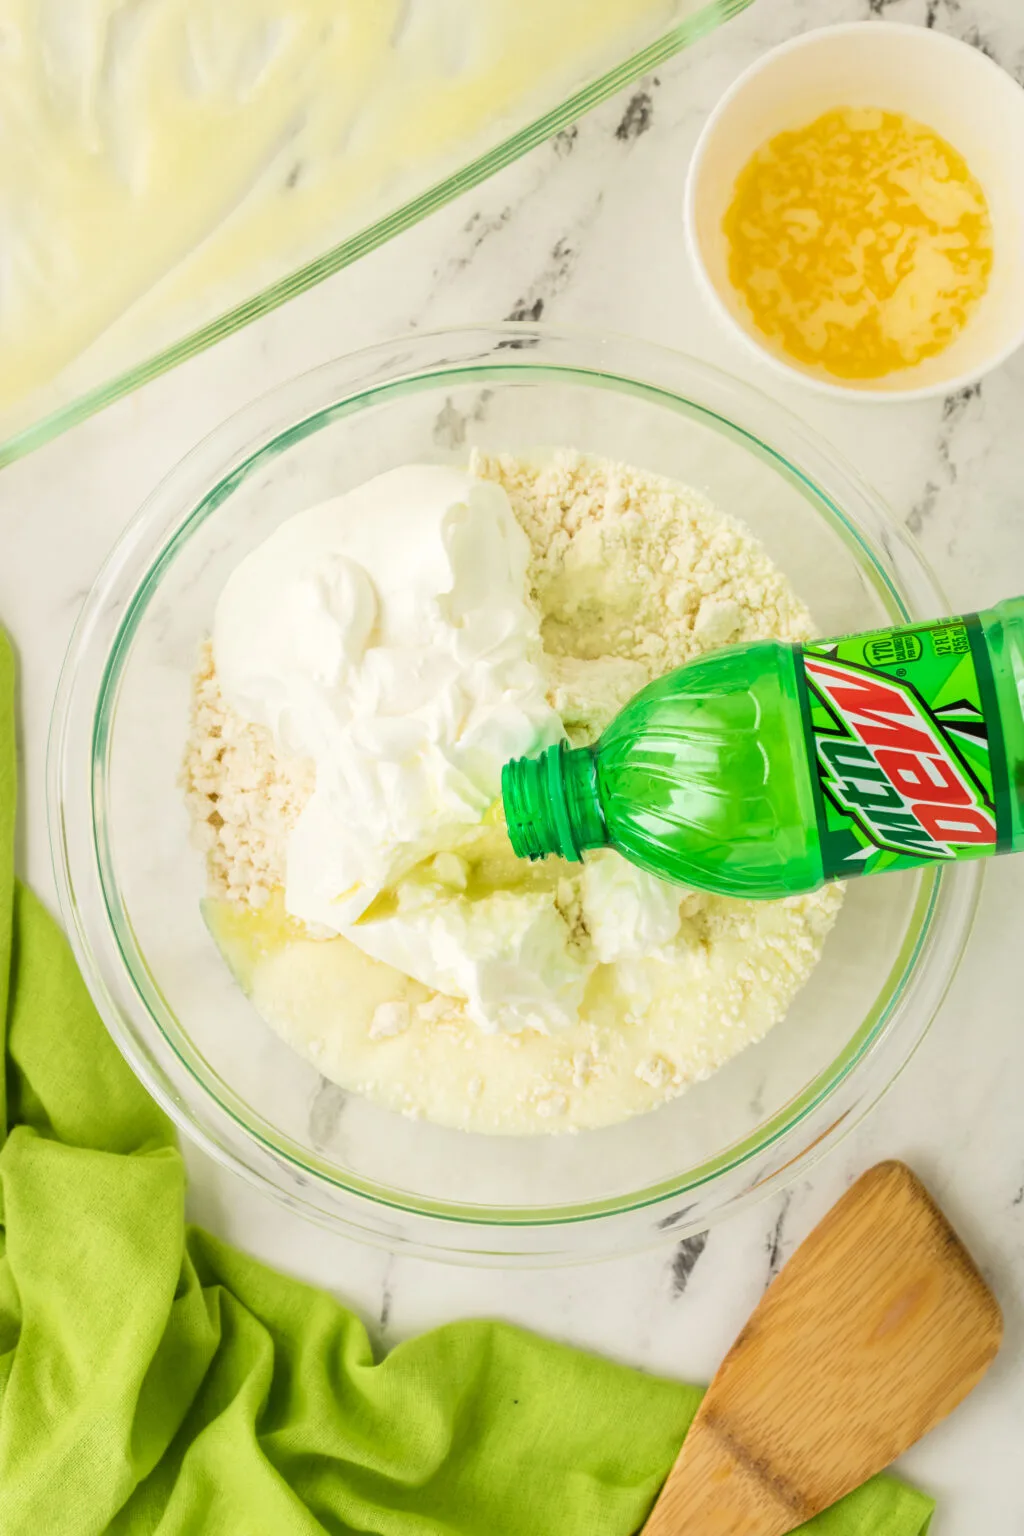 mountain dew being poured into bowl of baking mix